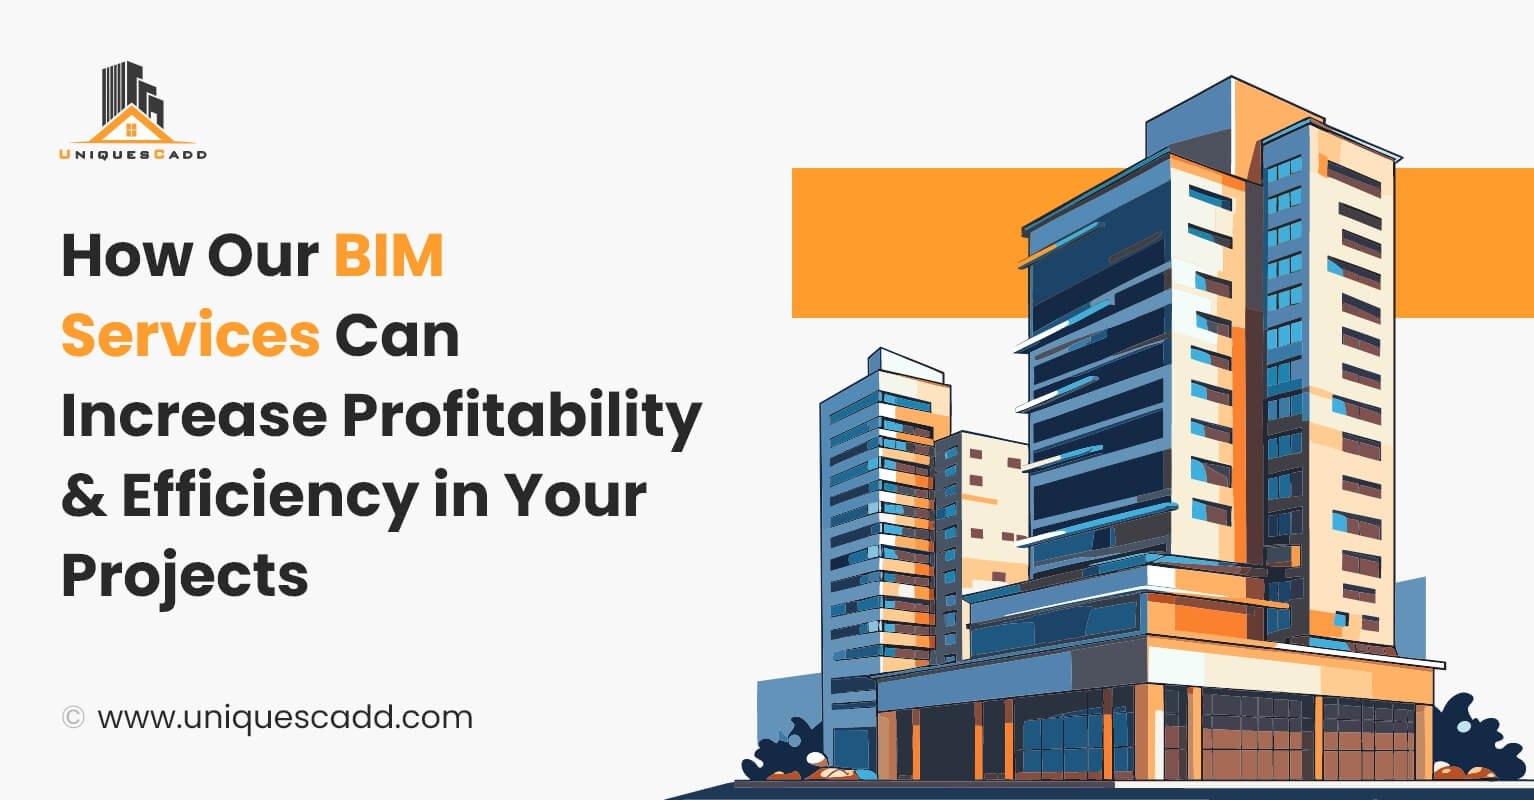 How Our BIM Services Can Increase Profitability & Efficiency in Your Projects